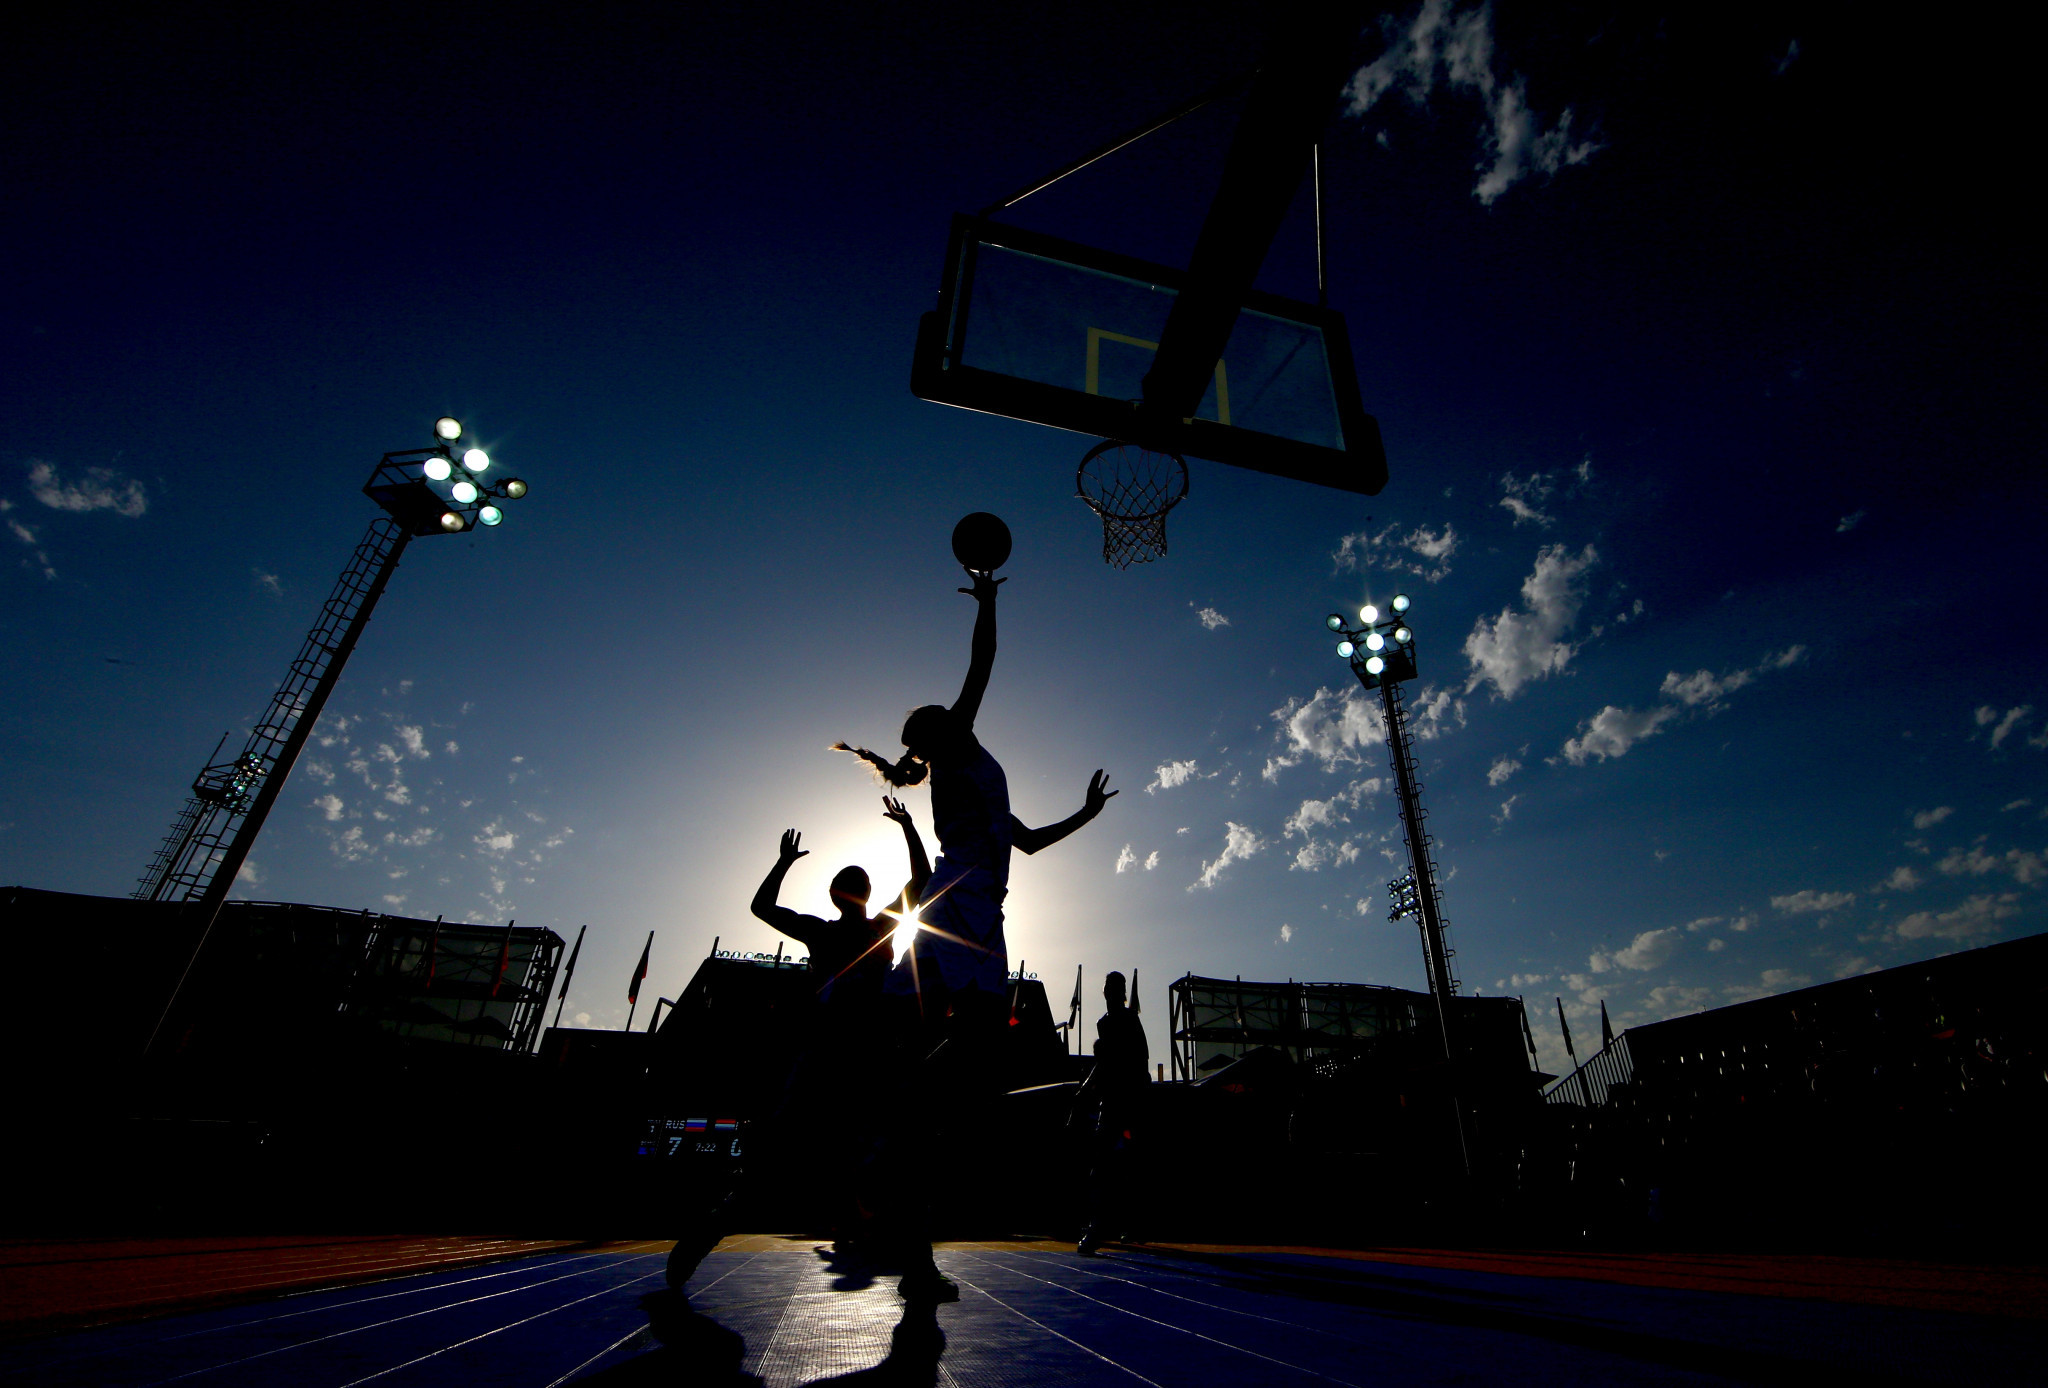 Birmingham 2022 will see 3x3 basketball debut at the Commonwealth Games ©Getty Images